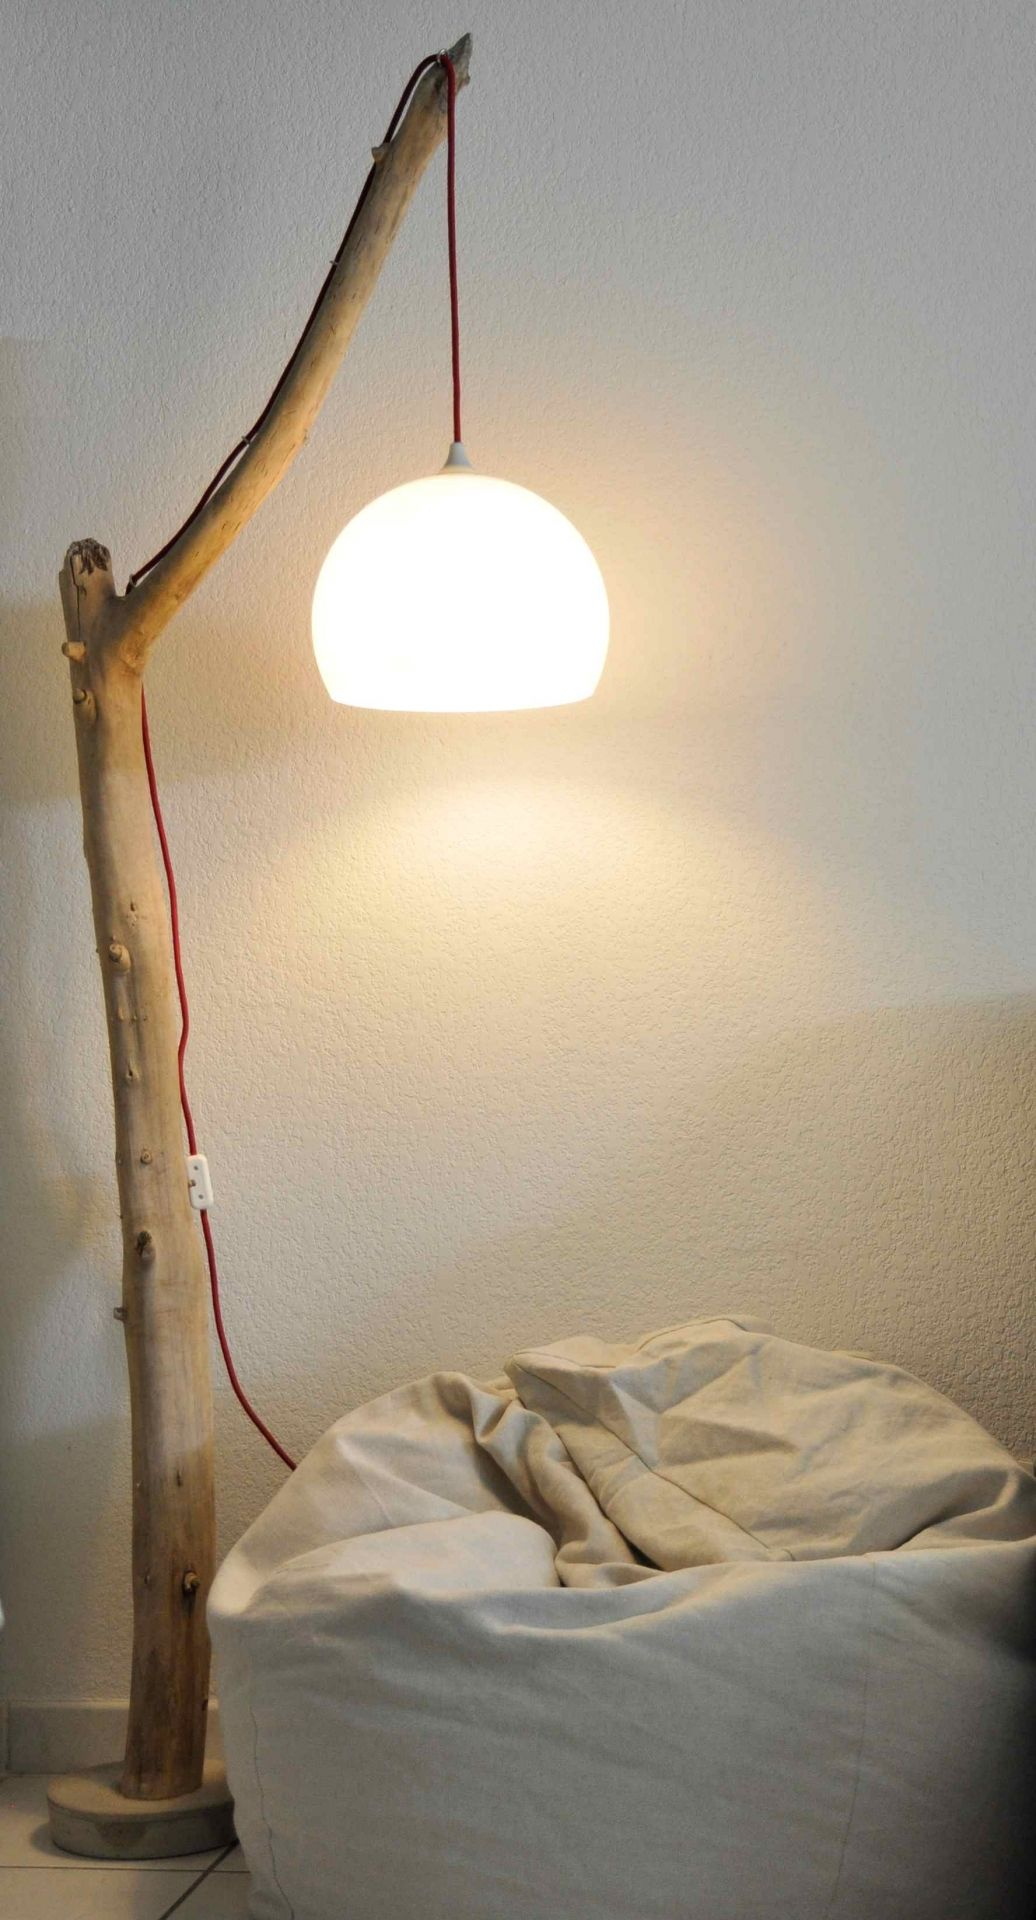 Diy Tree Branch Floor Lamplight Diy Home Decor Projects with sizing 1036 X 1920